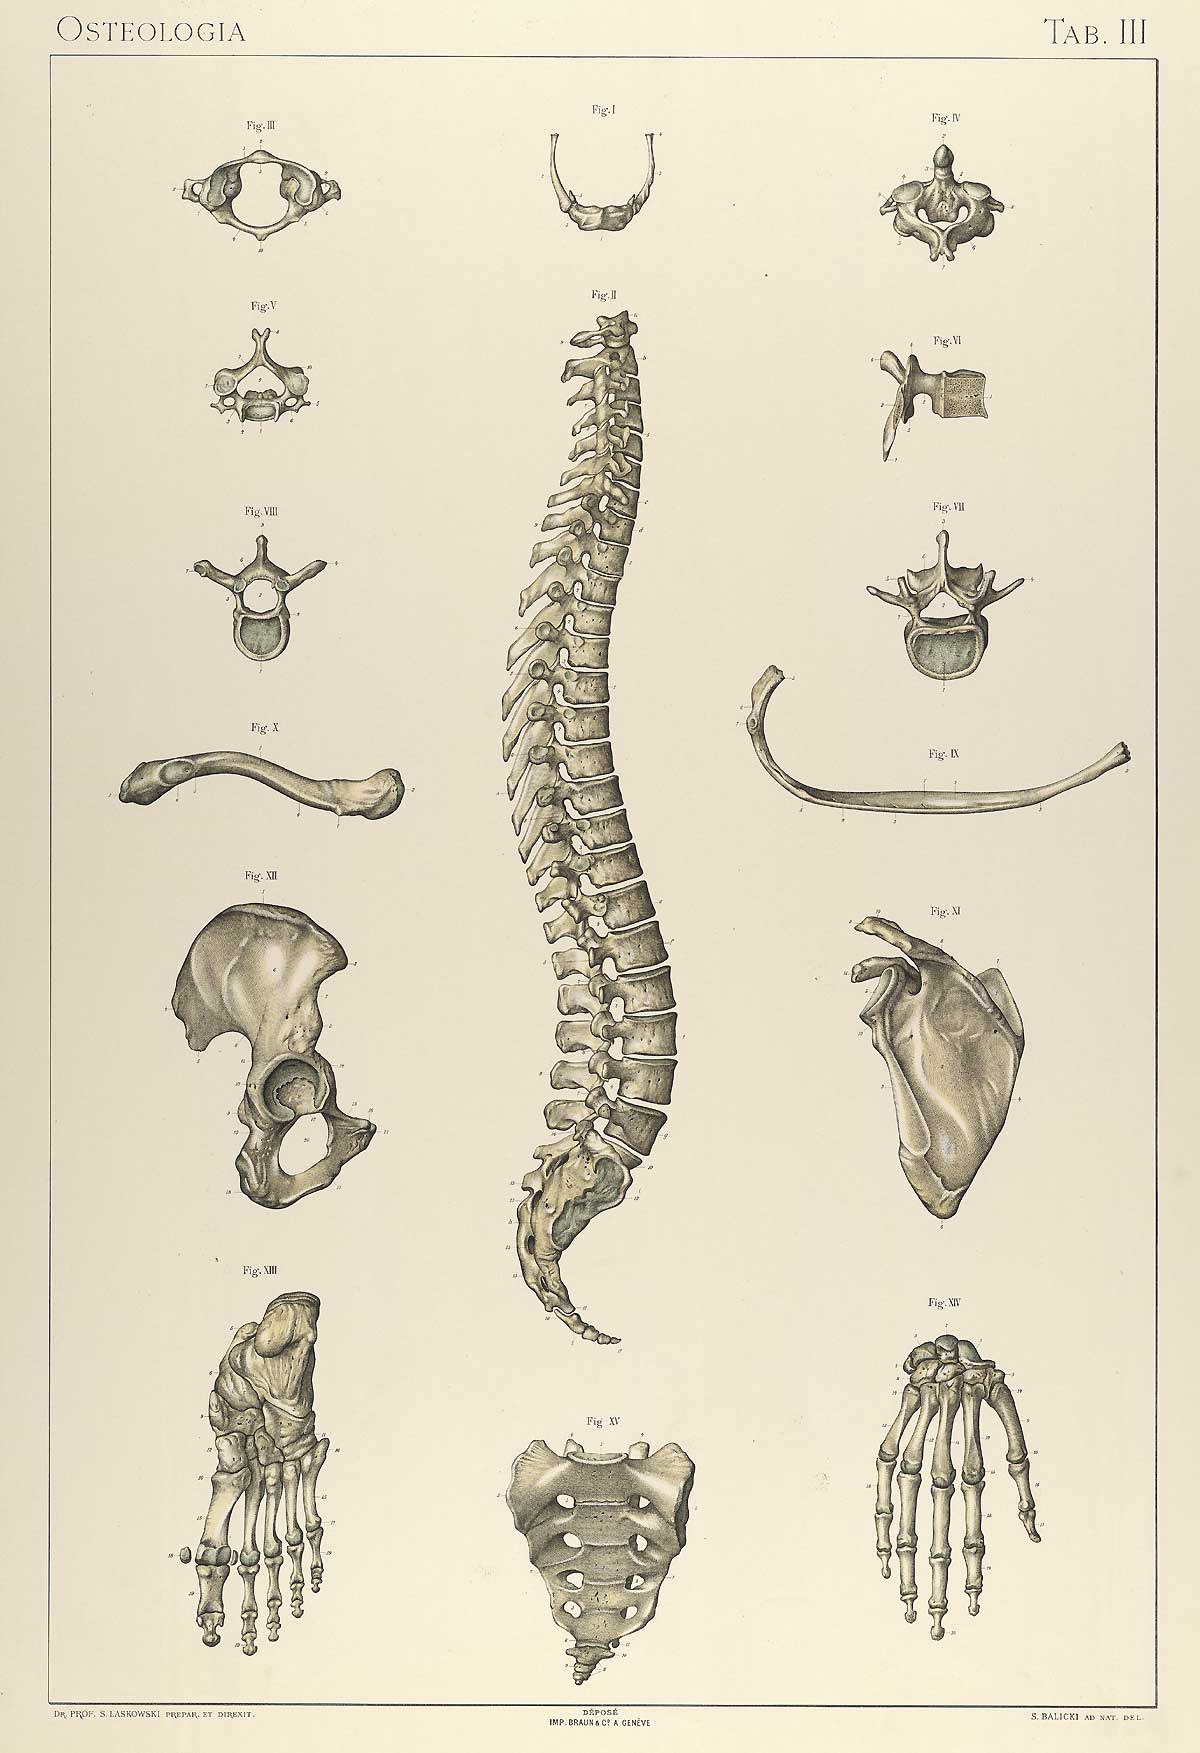 Plate 3 of Sigismond Laskowski's Anatomie normale du corps humain, featuring illustrations of the bones in the spine, ribs, pelvis, hands and feet.